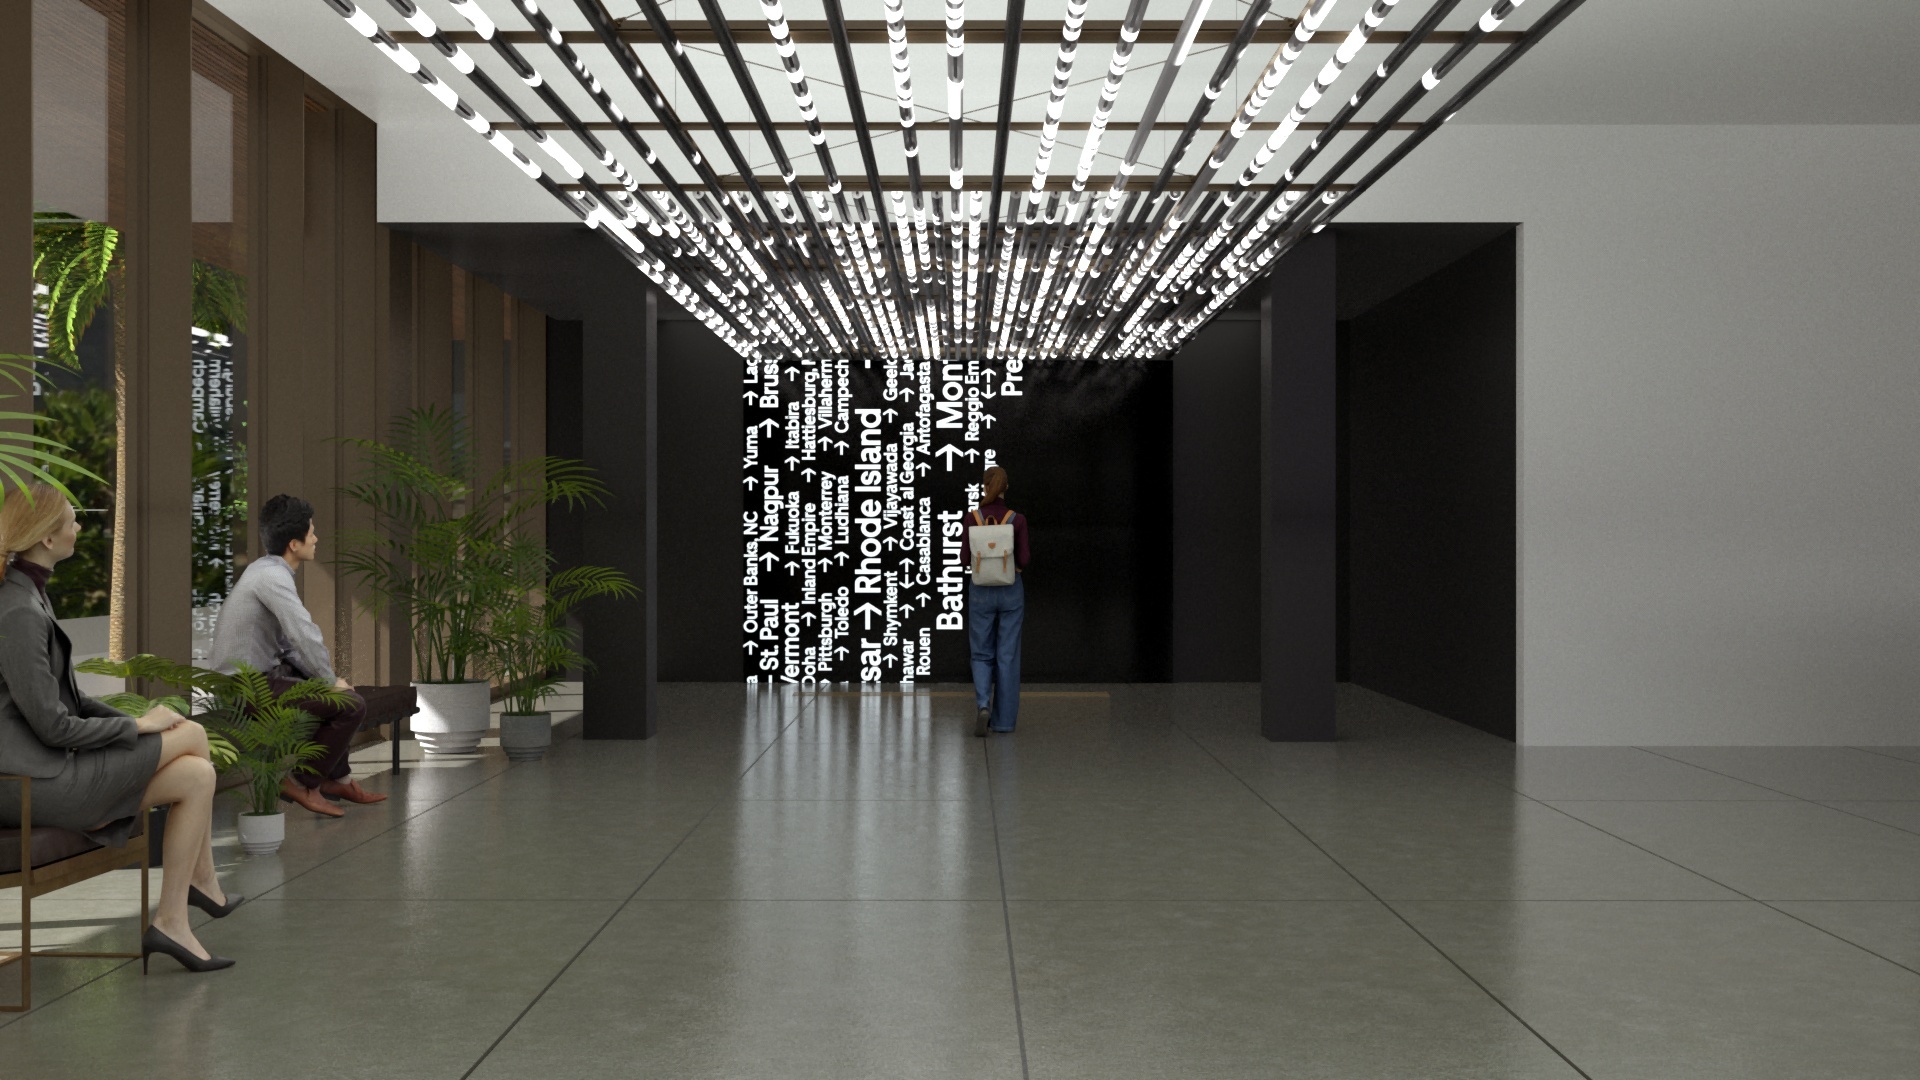 Render of woman walking towards square high-resolution screen, with light tubes overhead. City names in white text on a black background are running across the screen and tubes